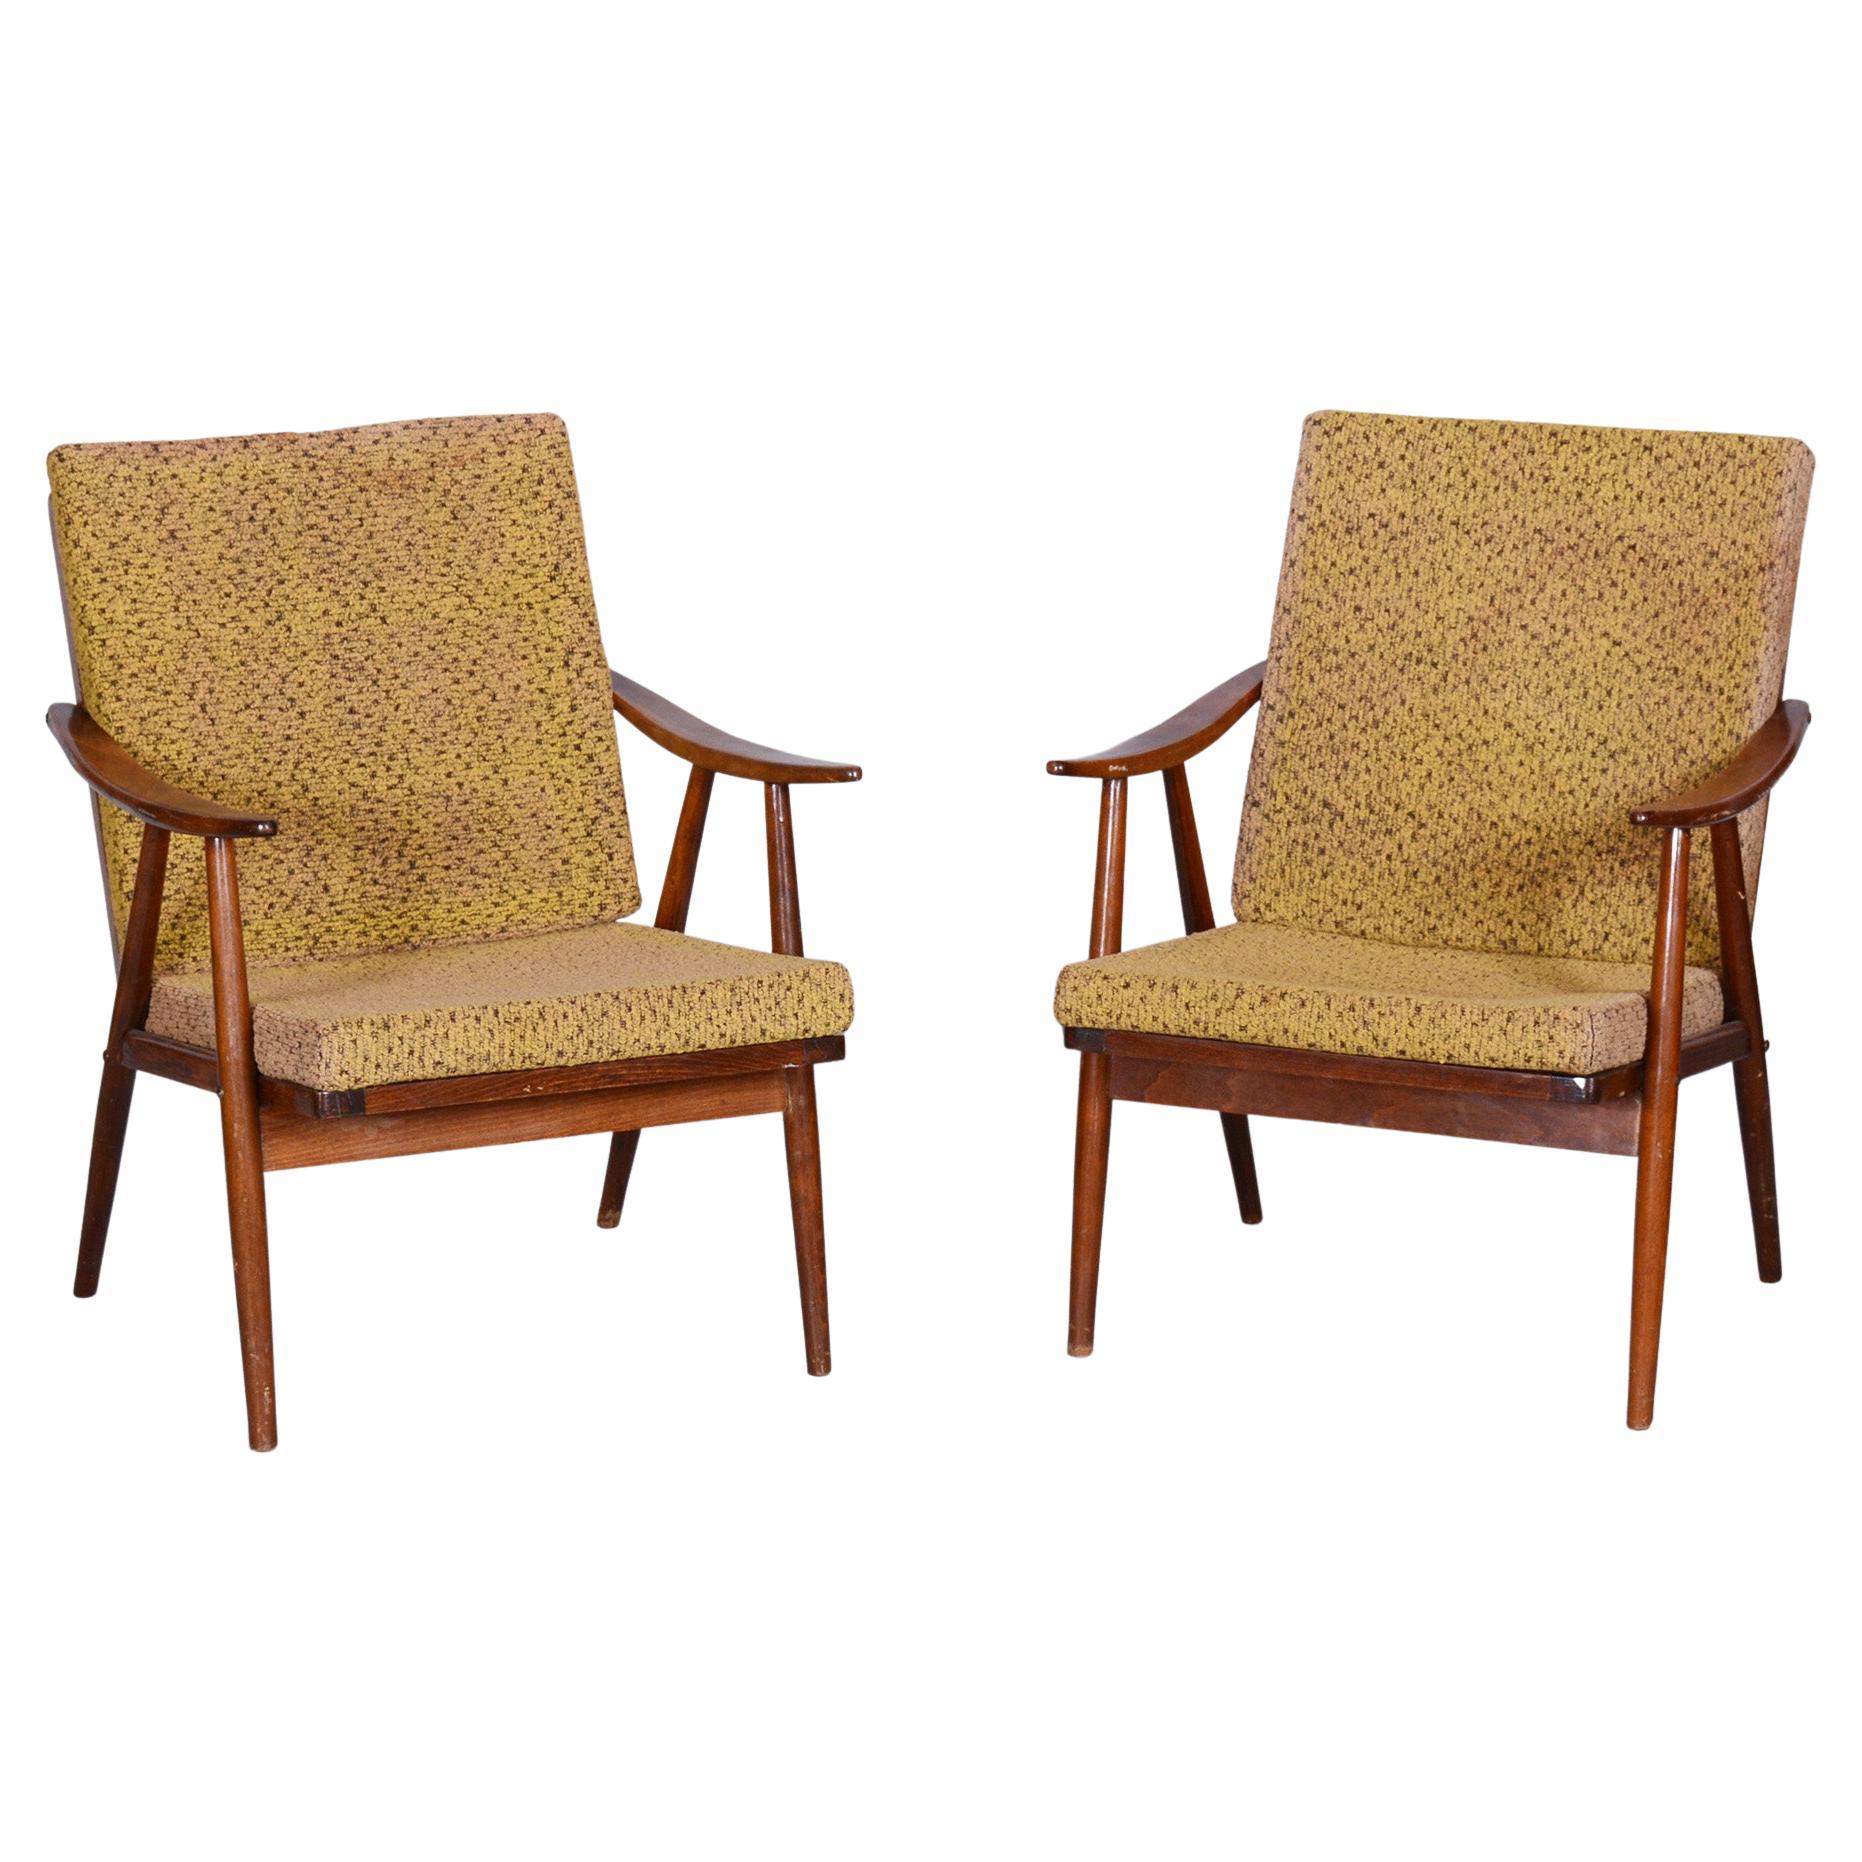 Pair of Midcentury Beech Armchairs, Úluv, Revived Polish, Czechia, 1960s For Sale